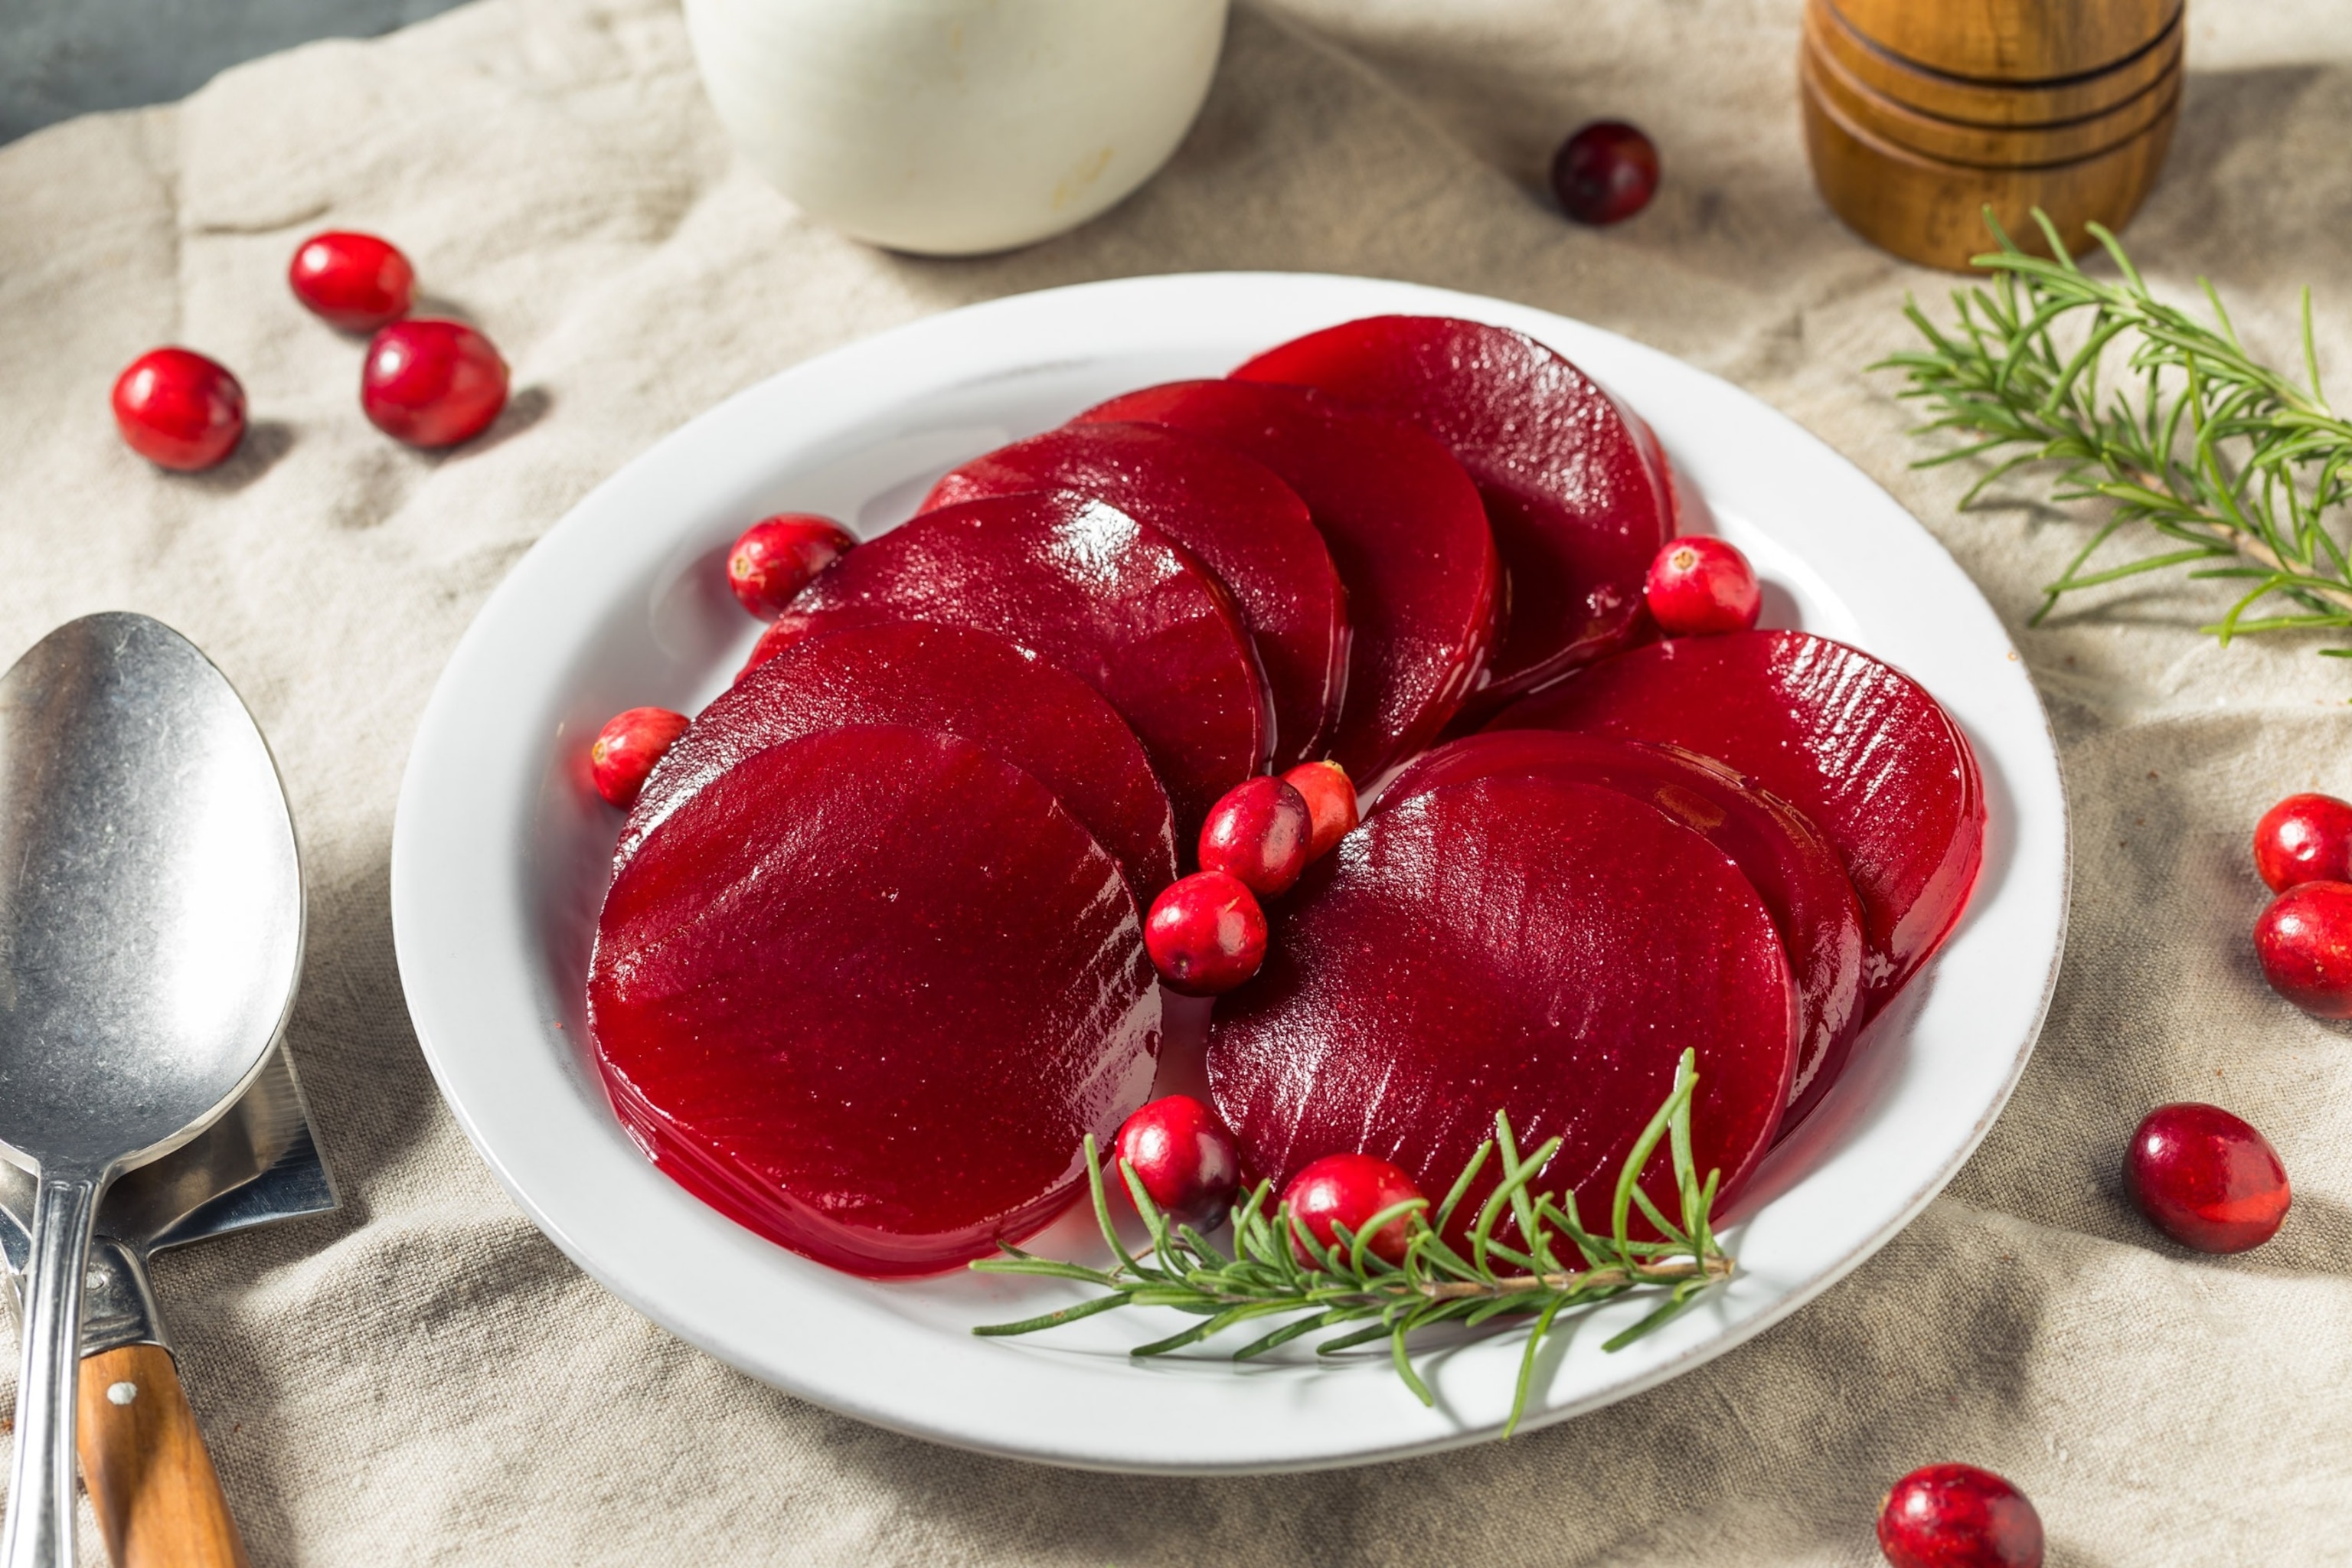 PHOTO: Canned cranberry sauce is pictured.